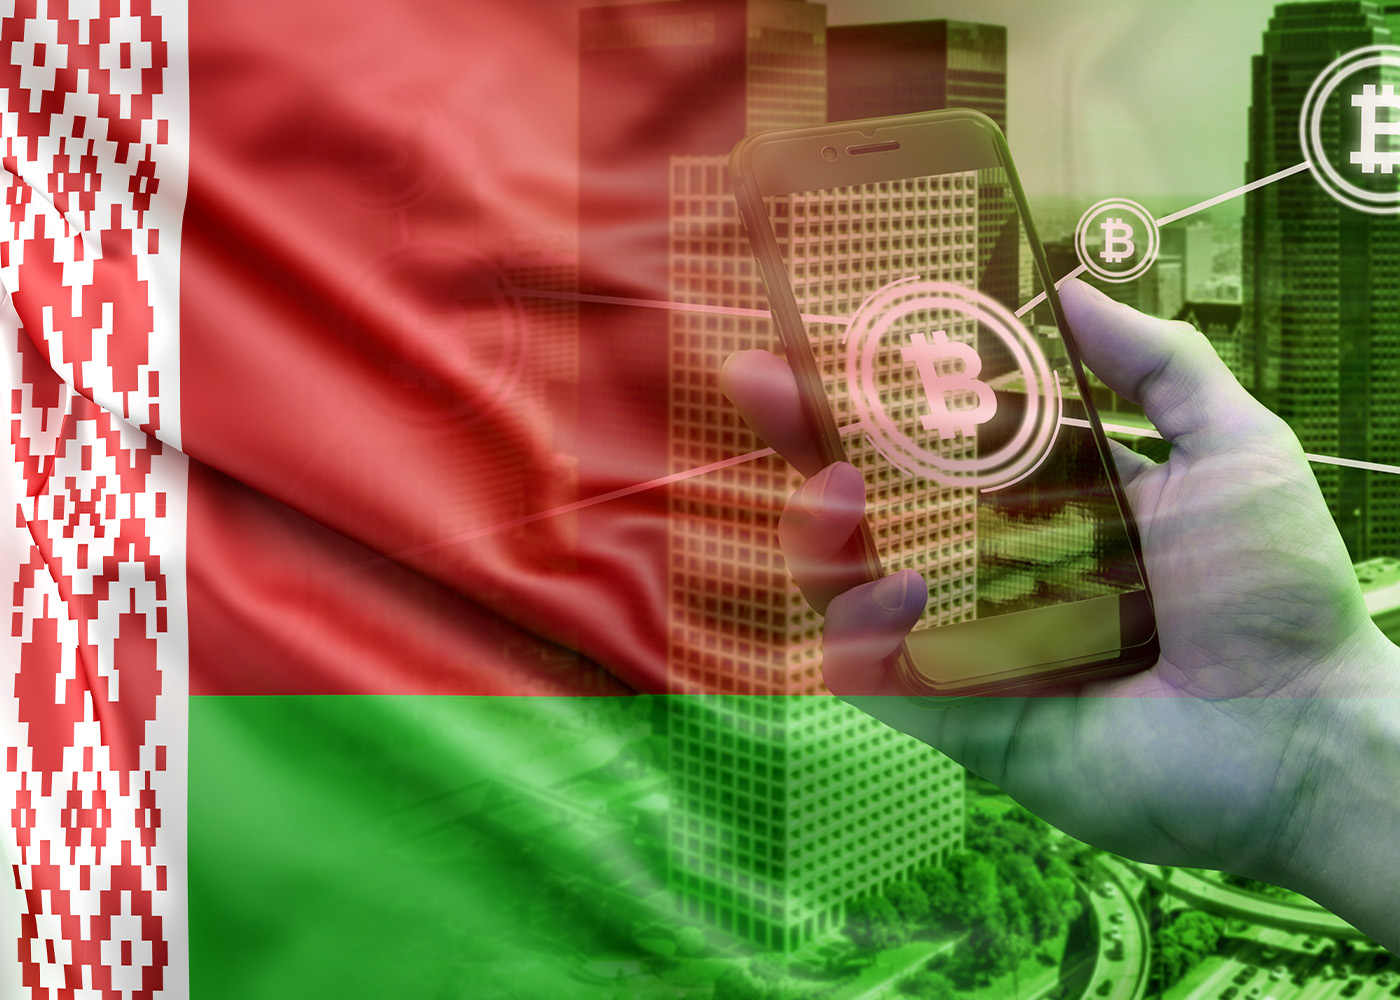 Belarus Extends Its Crypto Taxation Policies No Taxation Until 2025